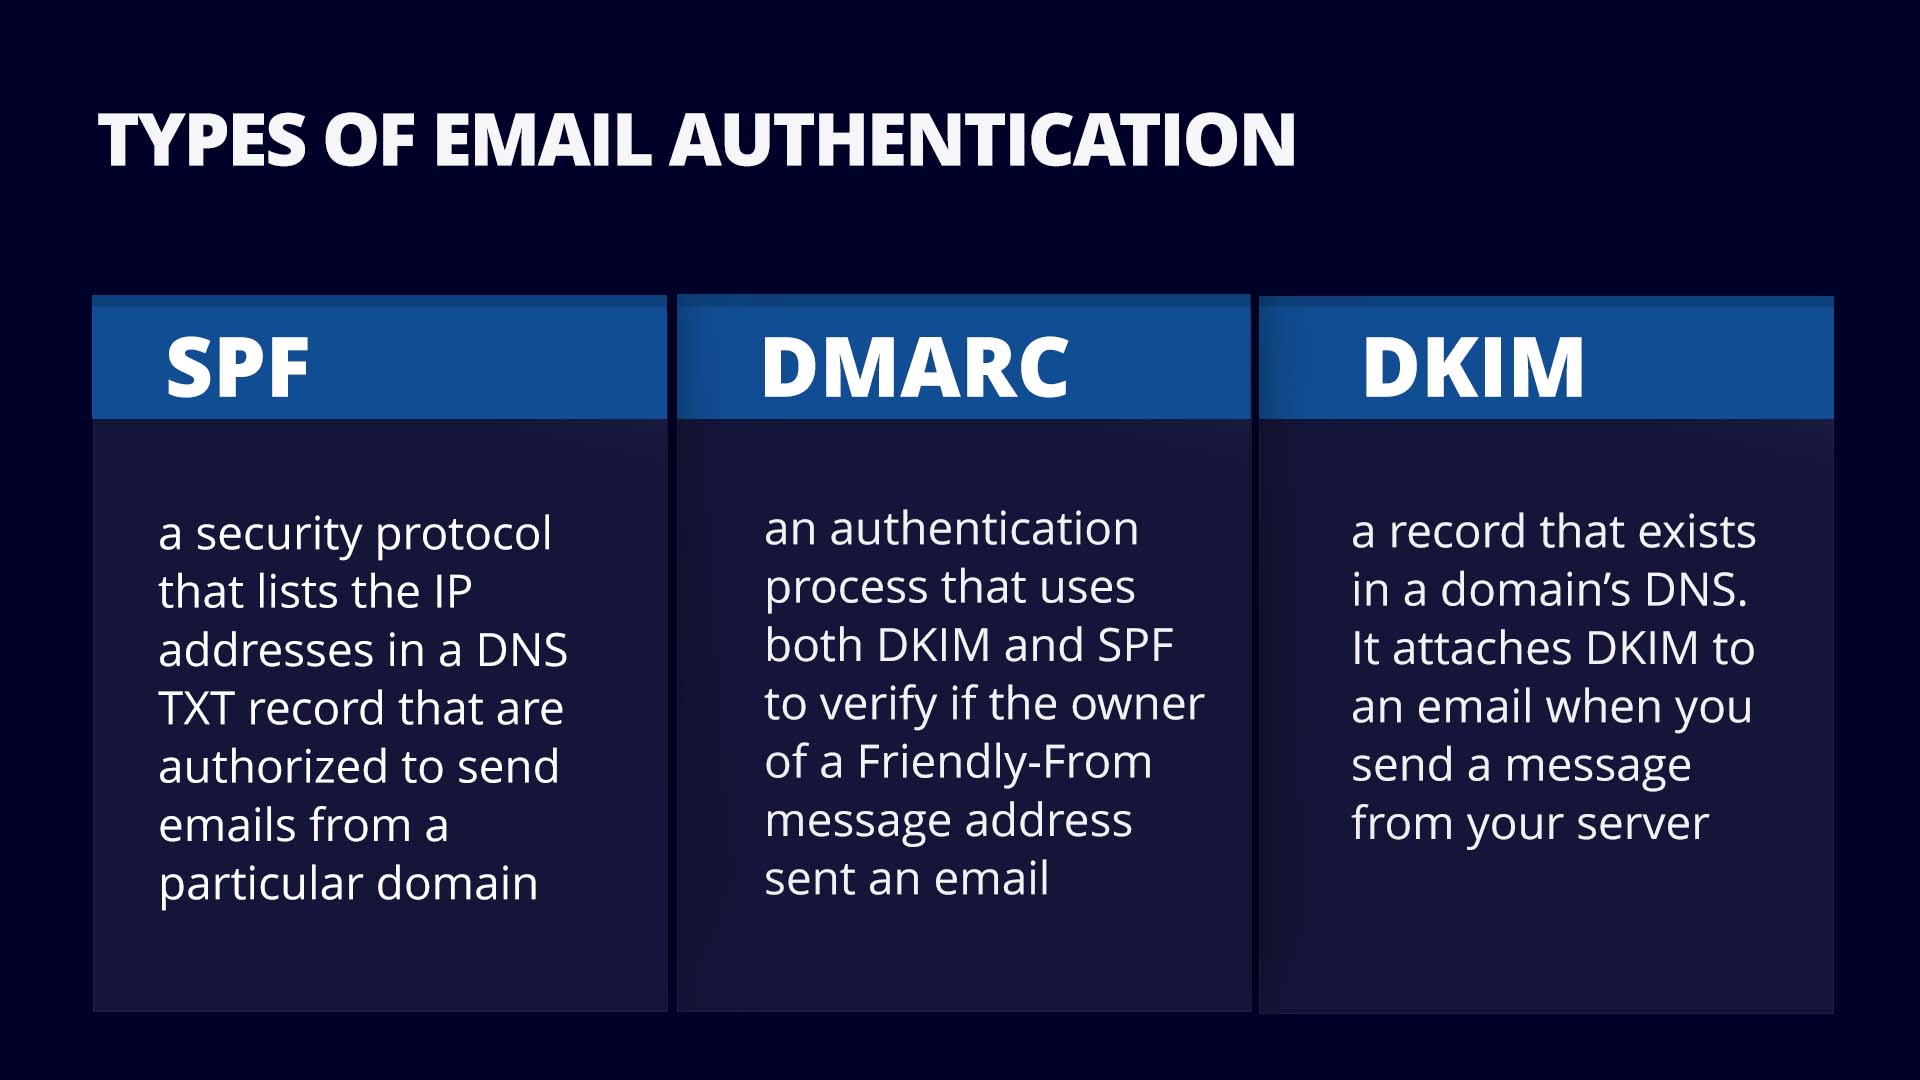 Infographic explaining types of email authentication: SPF, DMARC, and DKIM